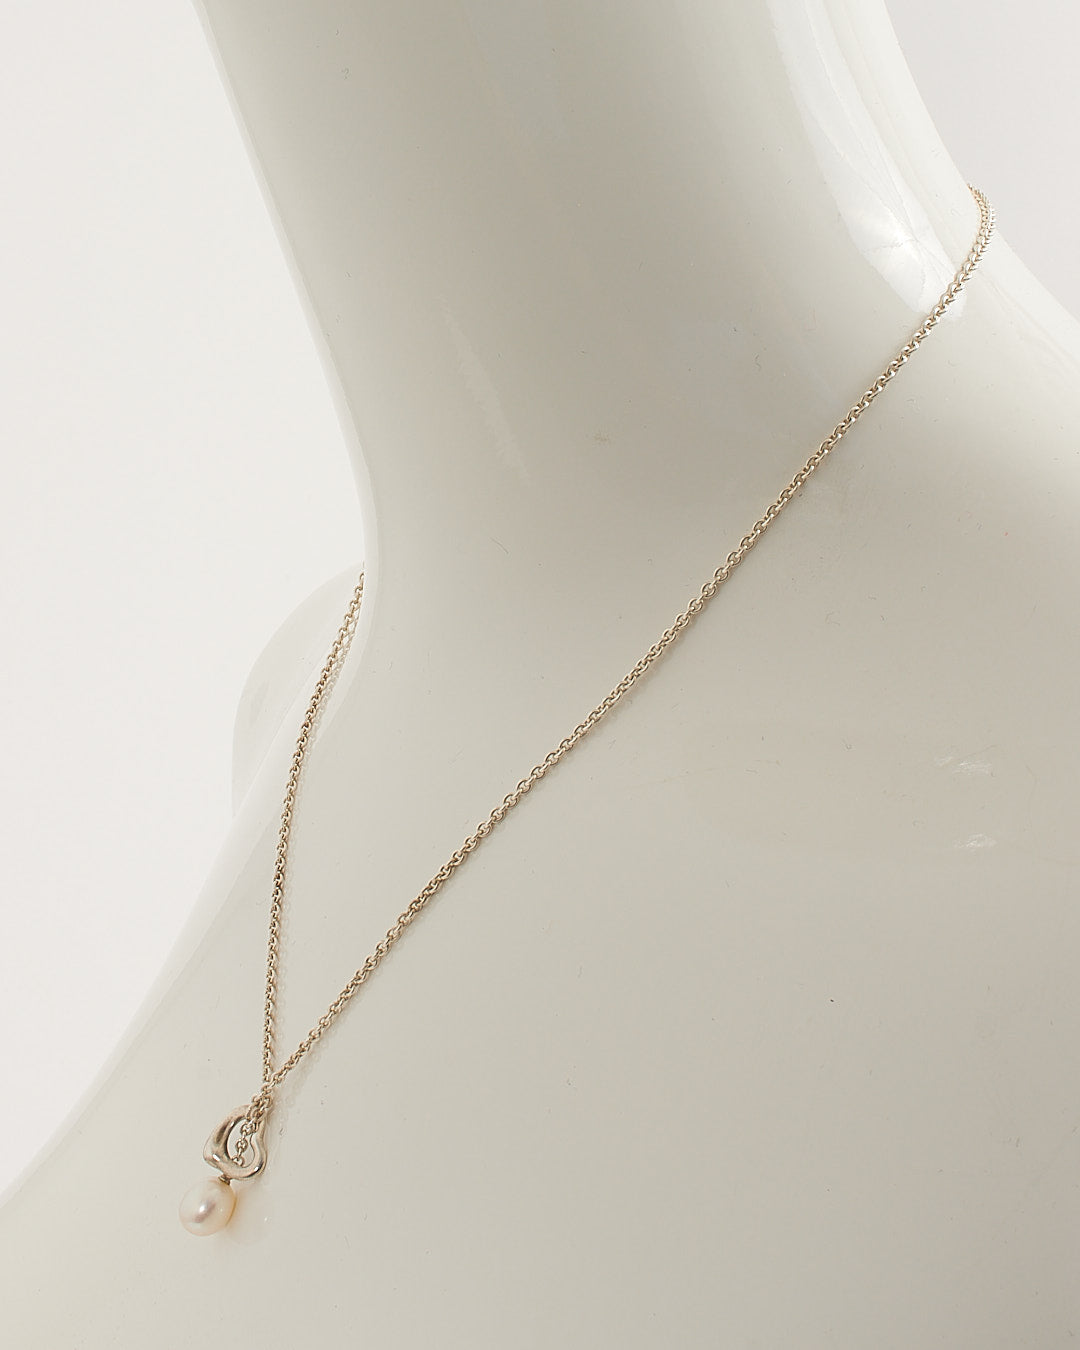 Tiffany & Co. Sterling Silver Open Heart Lariat Necklace